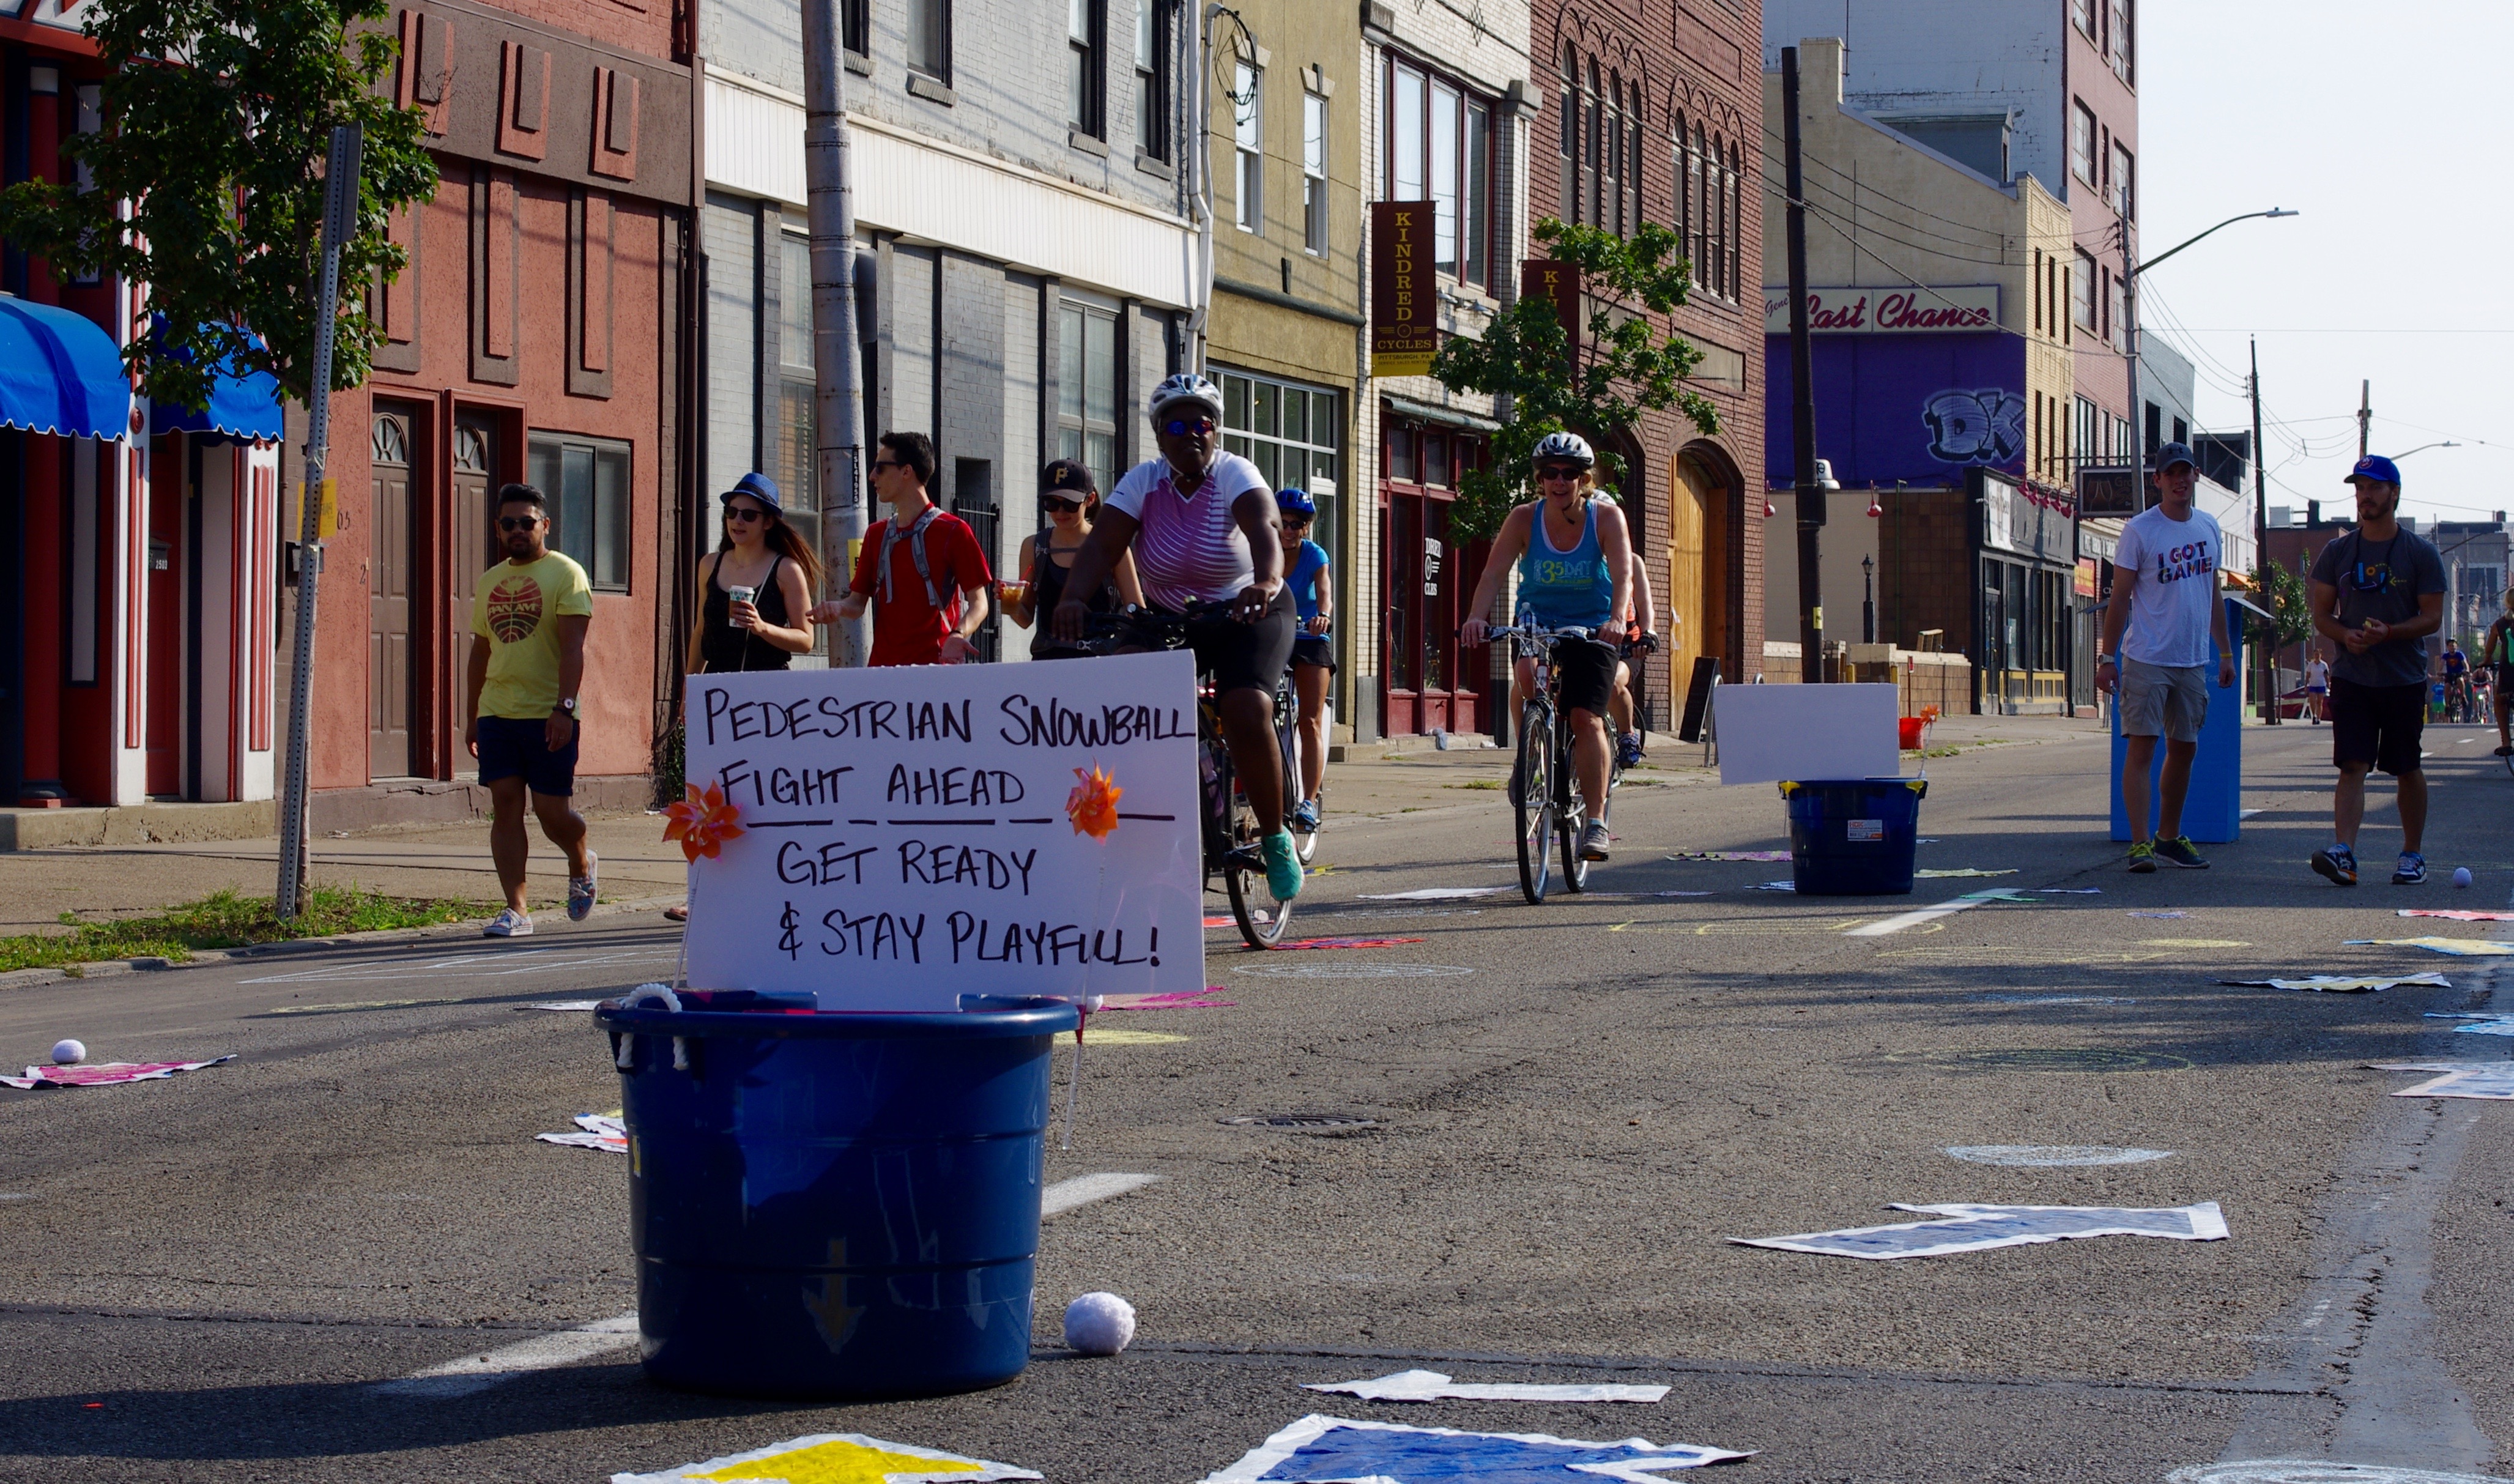 Games and activities were staged throughout the Open Streets route.